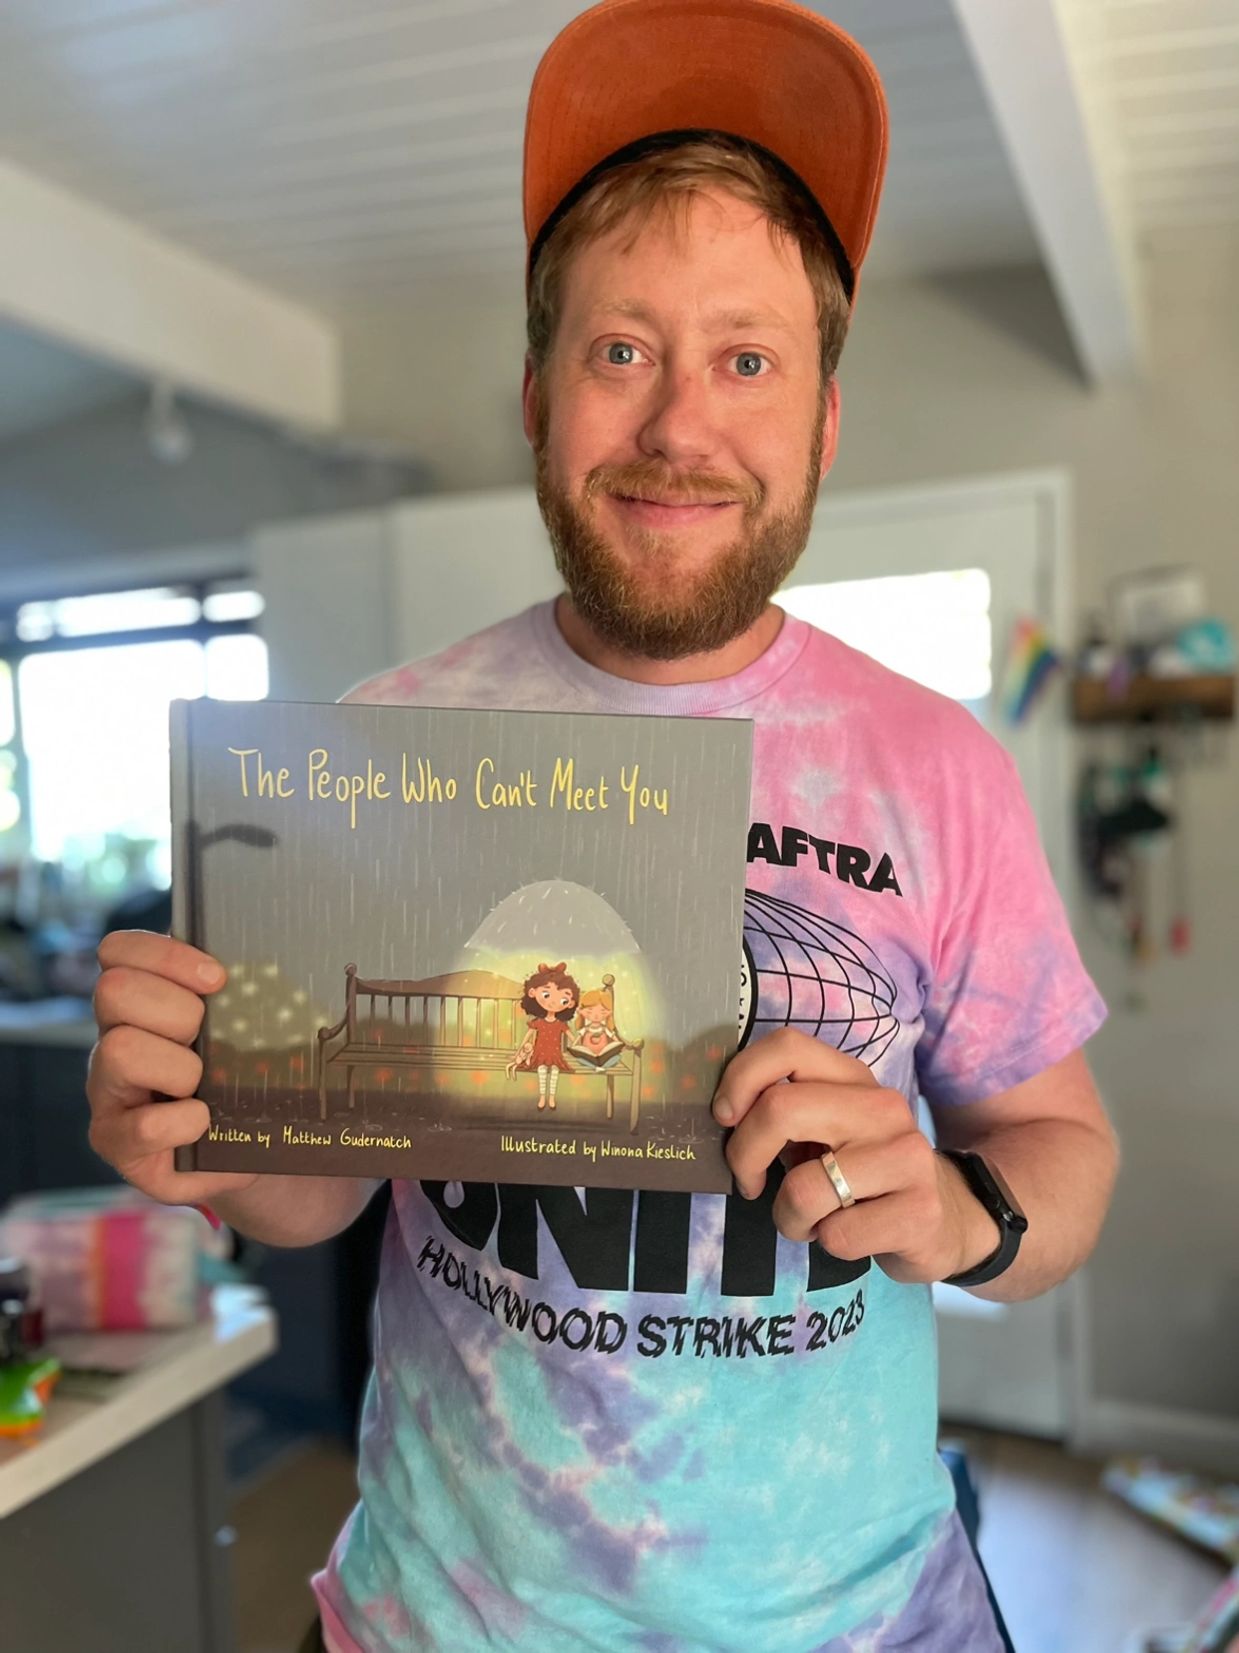 Matt Gudernatch holds his book, The People Who Can't Meet You